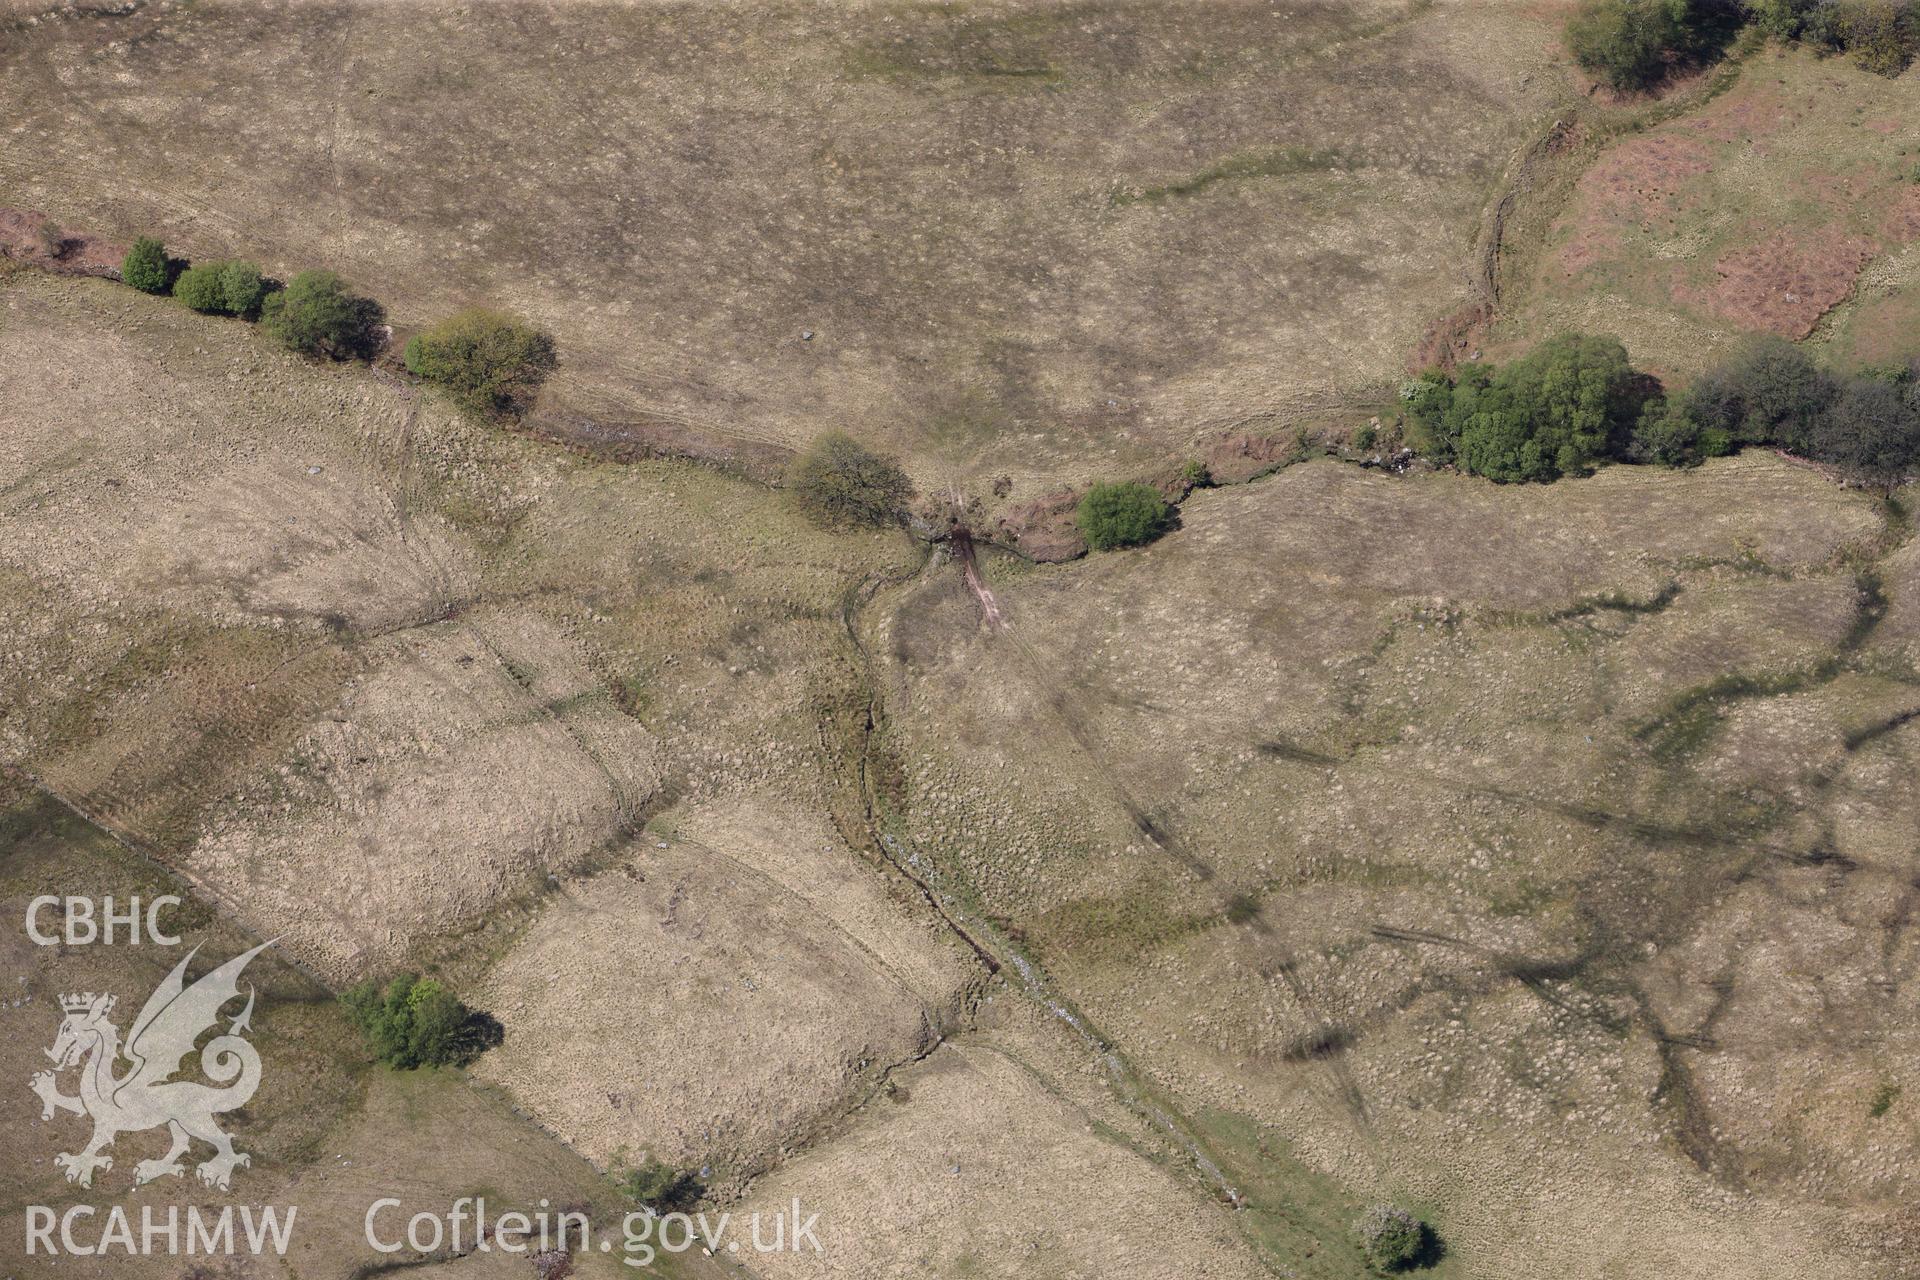 RCAHMW colour oblique photograph of Llwyn Wennol, burnt mound, at edge of frame. Taken by Toby Driver on 22/05/2012.